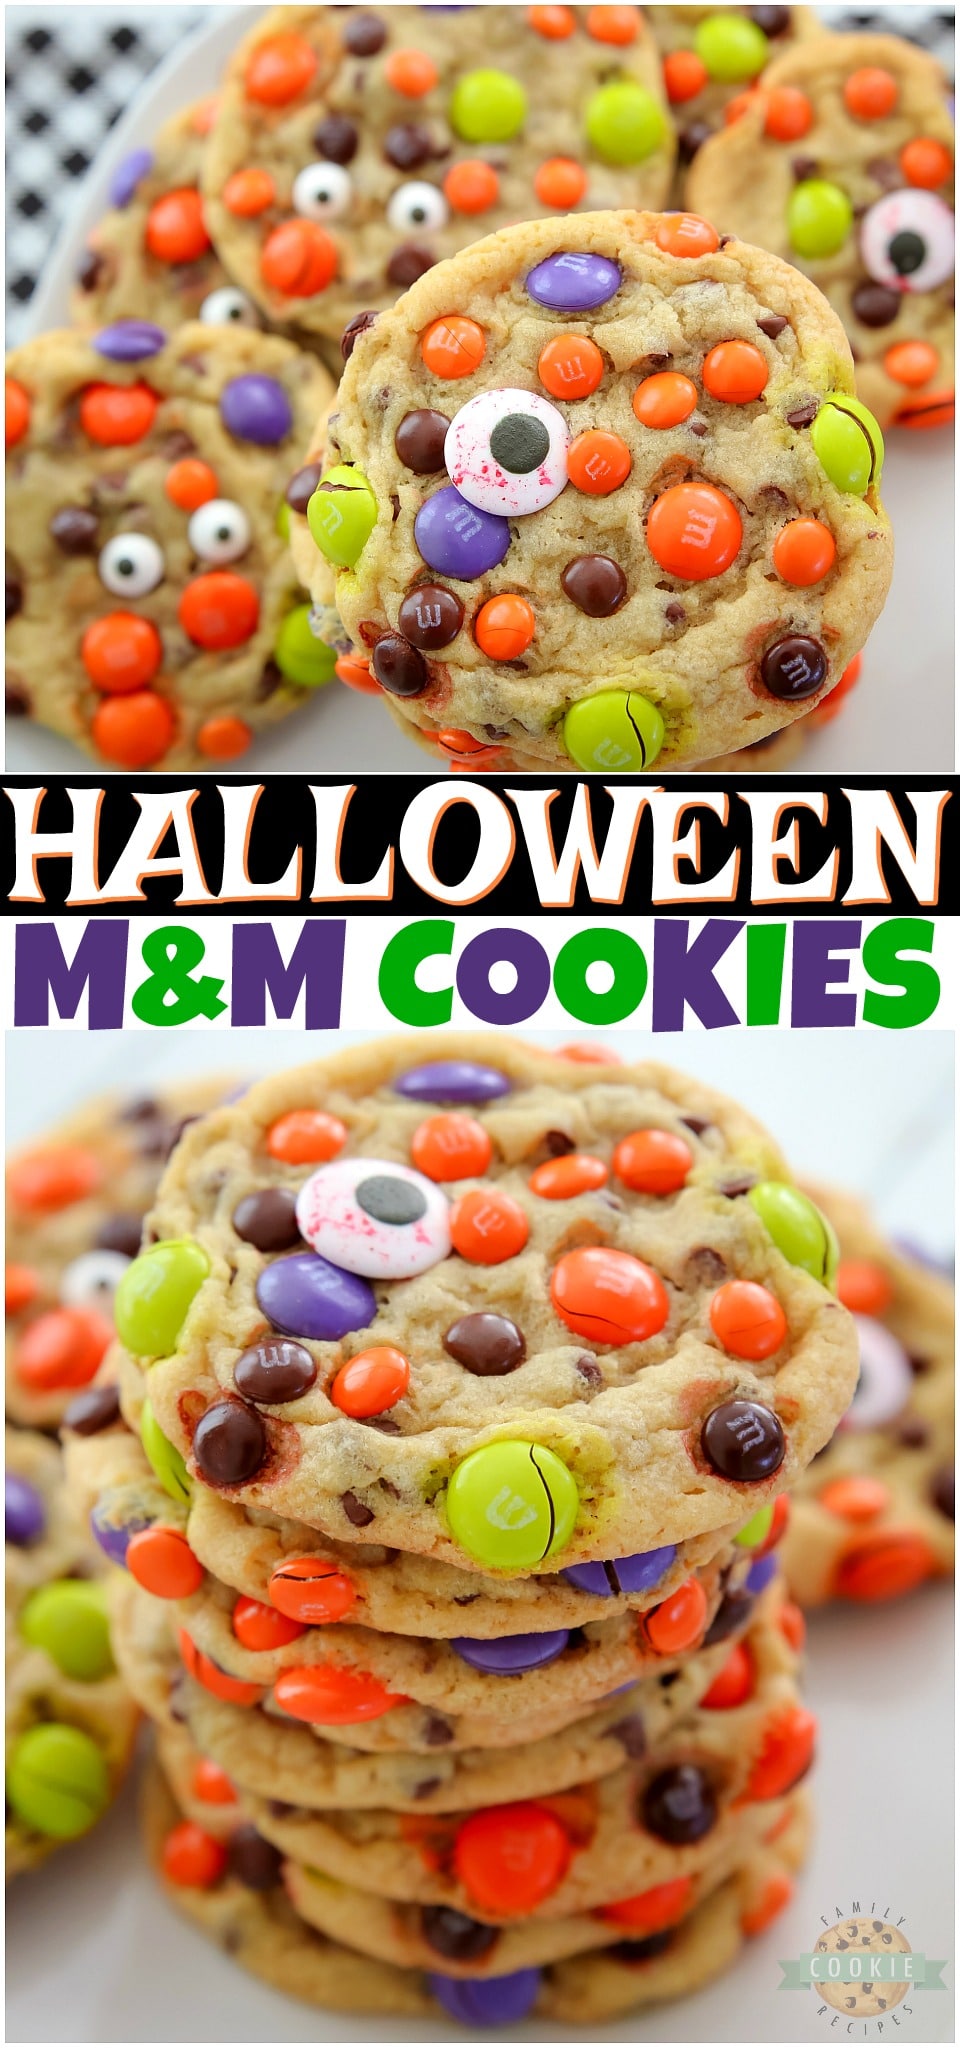 Perfect M&M HALLOWEEN Cookies made with butter, sugars, pudding mix & festive M&M’s candies! Fun & festive Halloween Cookie recipe with candy that everyone loves! #cookies #M&M #Halloween #cookierecipe #HalloweenCookies #easyrecipe from FAMILY COOKIE RECIPES via @buttergirls